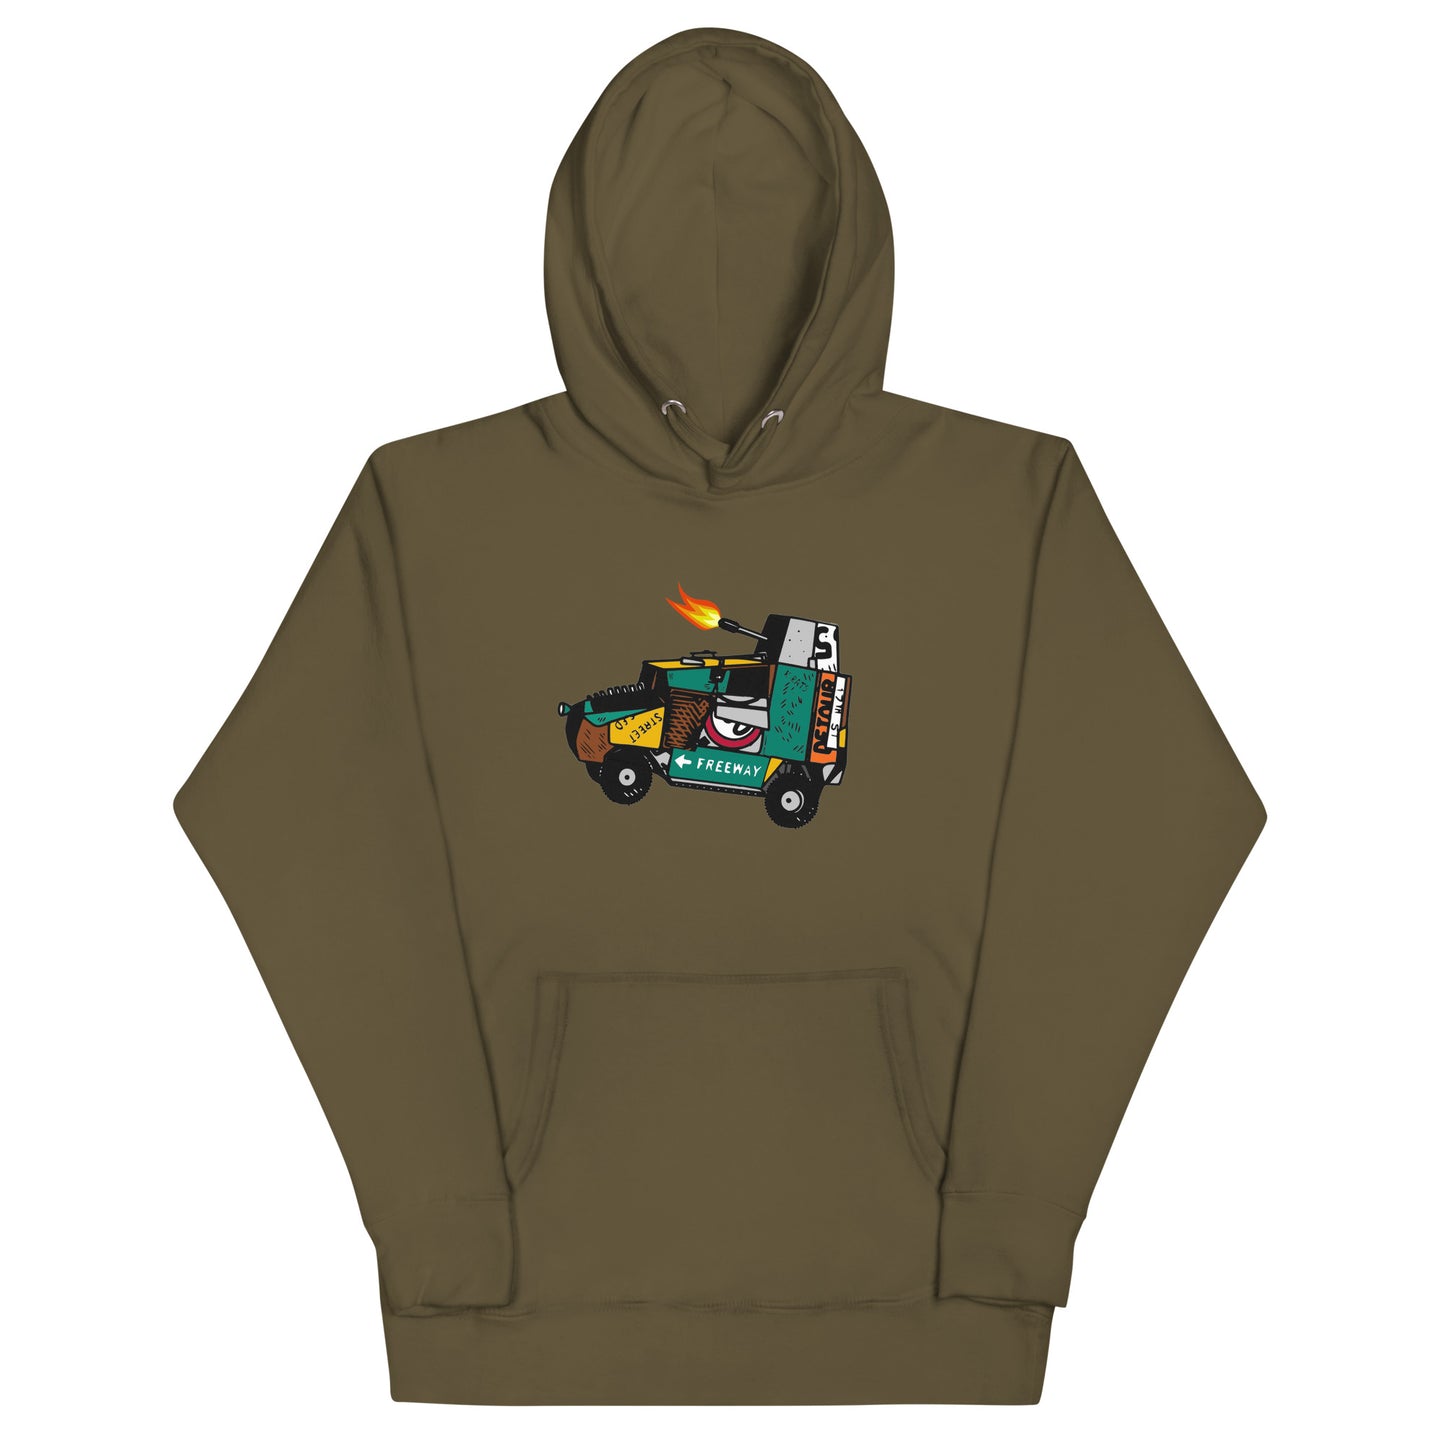 A Kinderpanzer Unisex Hoodie